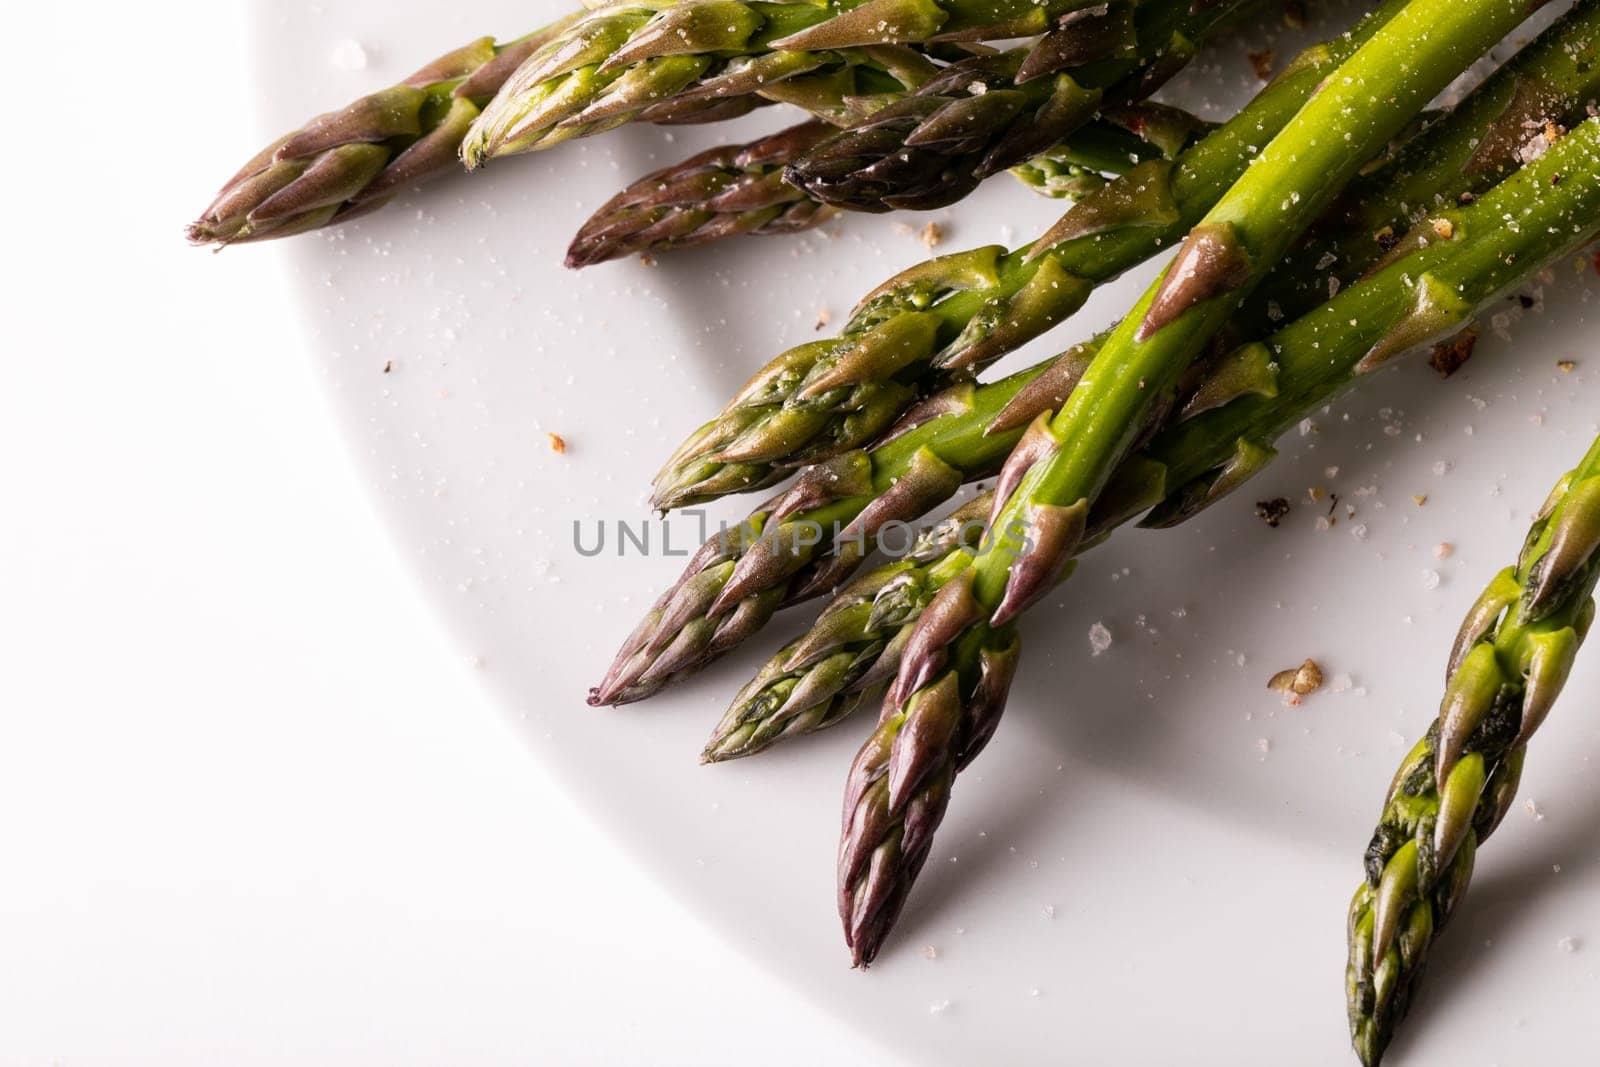 High angle close-up view of asparagus and seasoning in plate on white background. unaltered, food, healthy eating and organic concept.